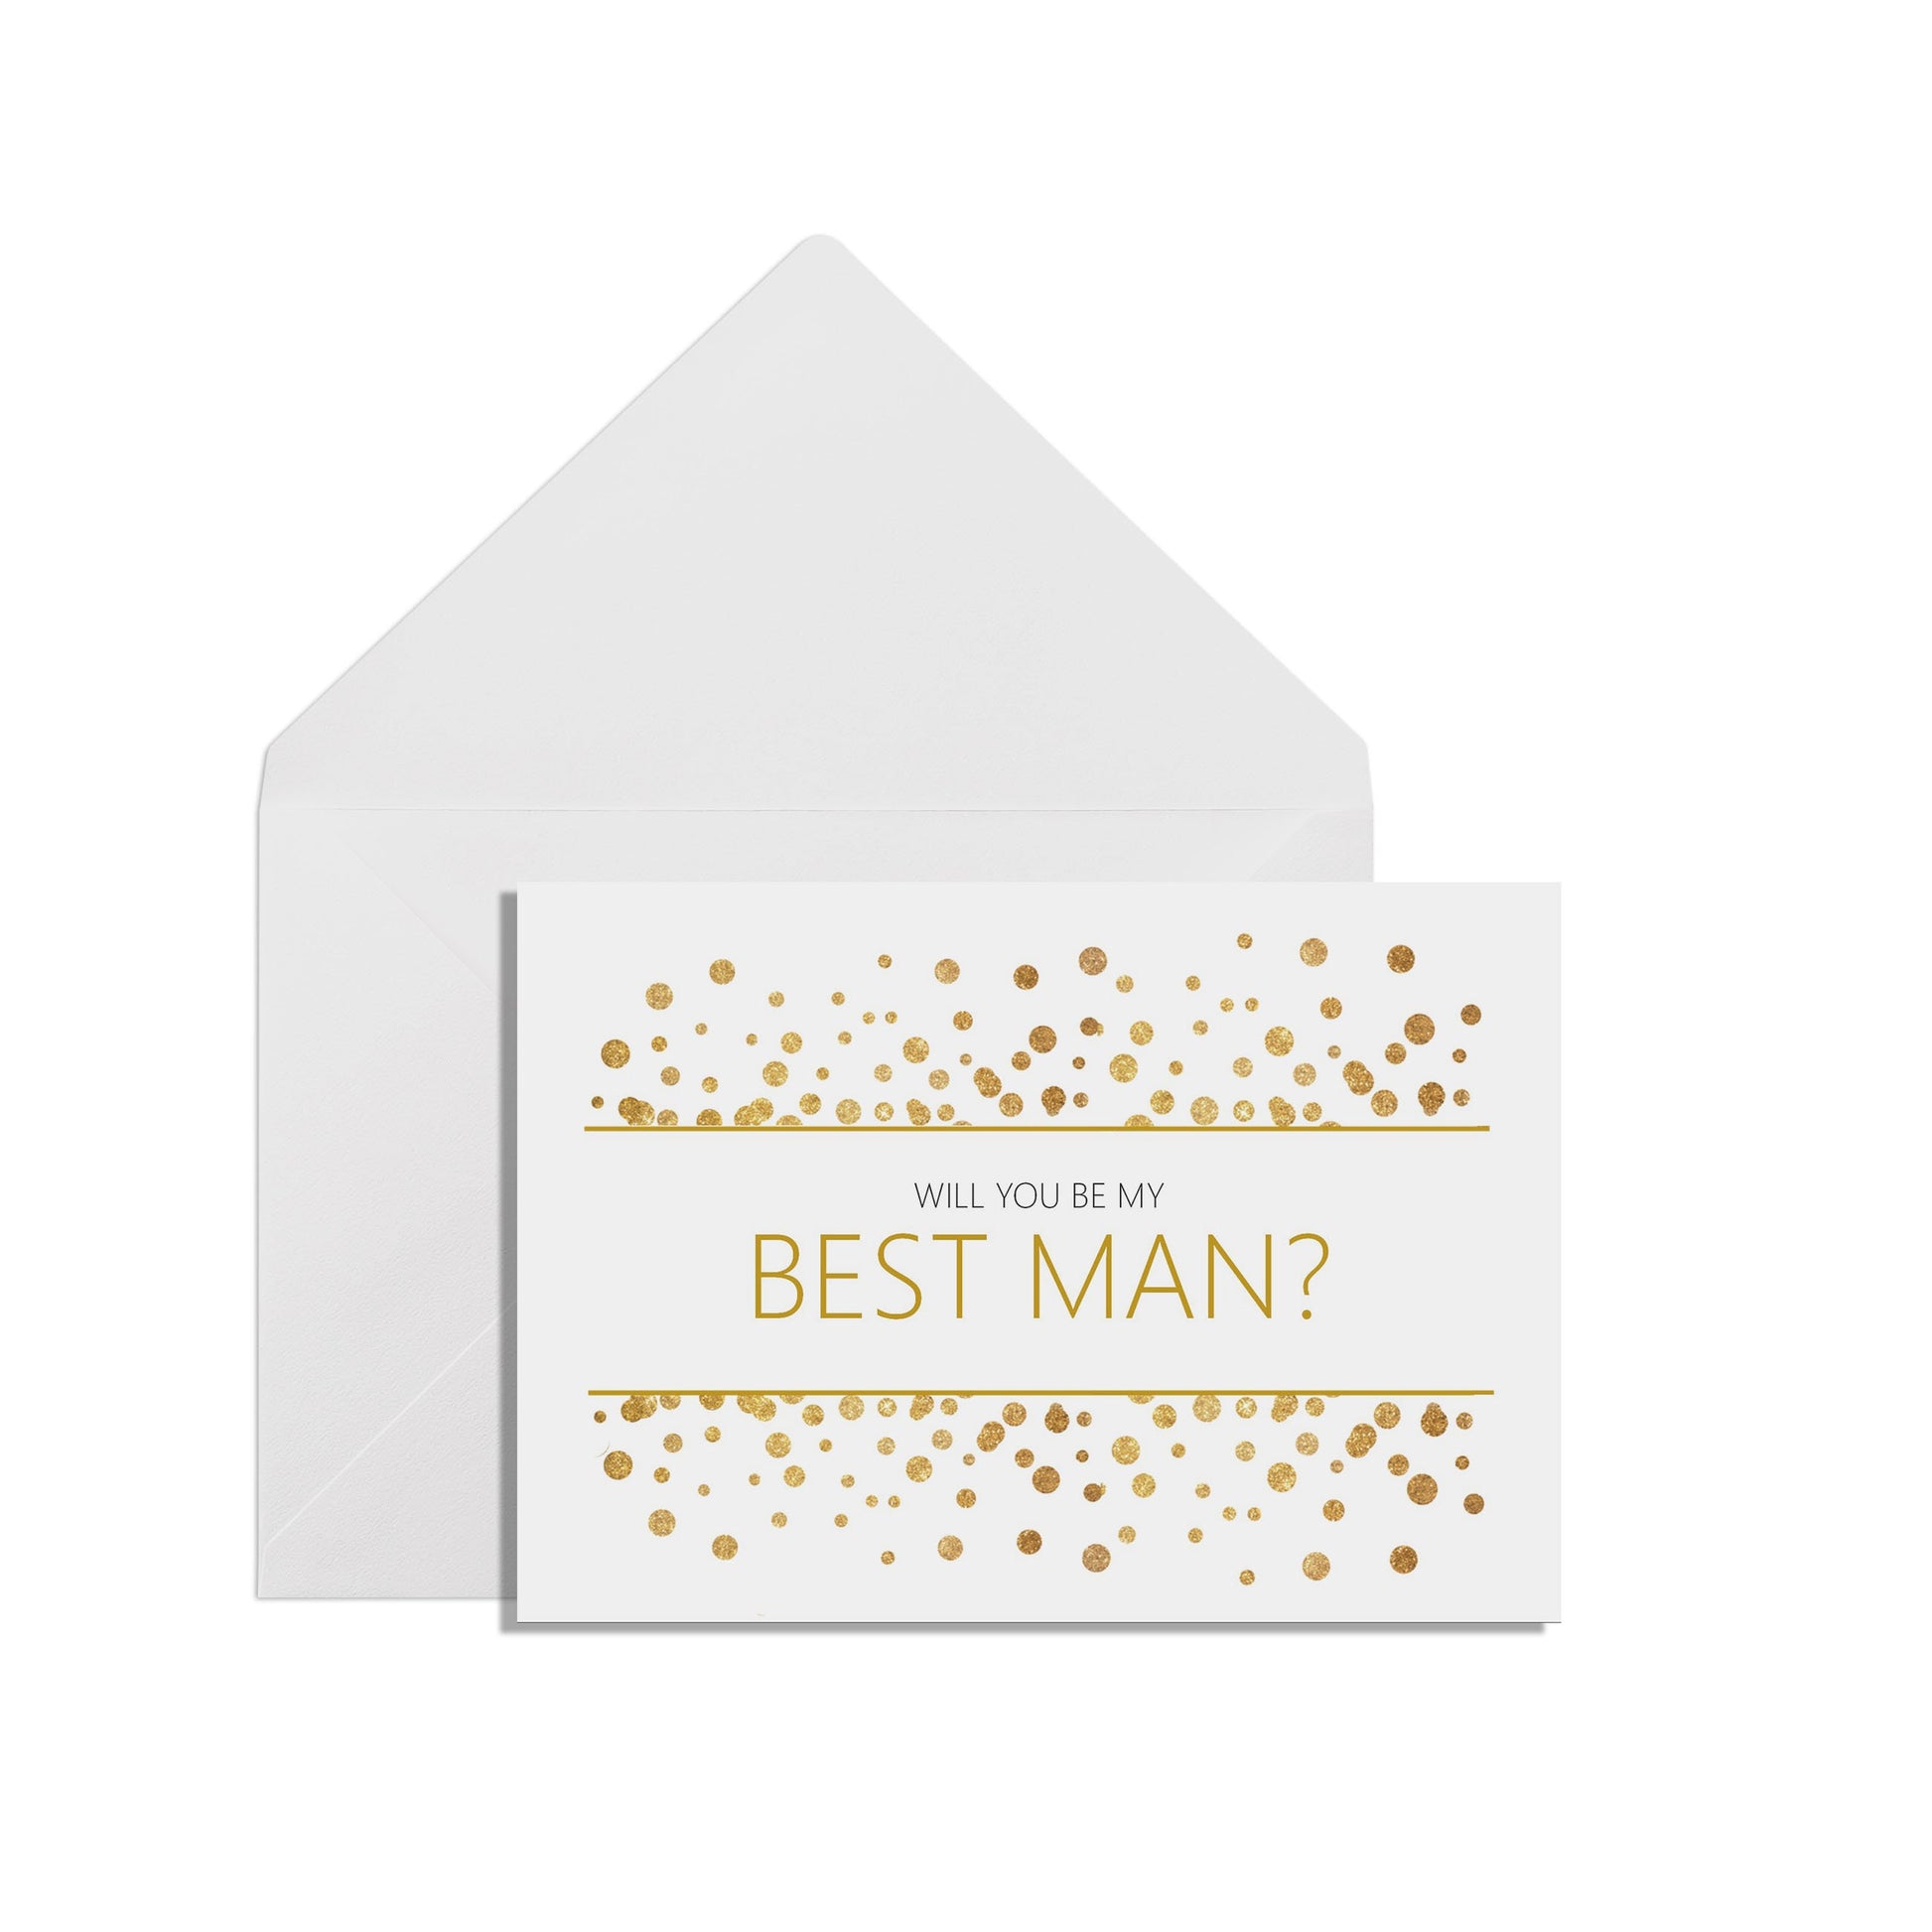 Will You Be My Best Man? A6 Gold Effect Wedding Proposal Card With A White Envelope